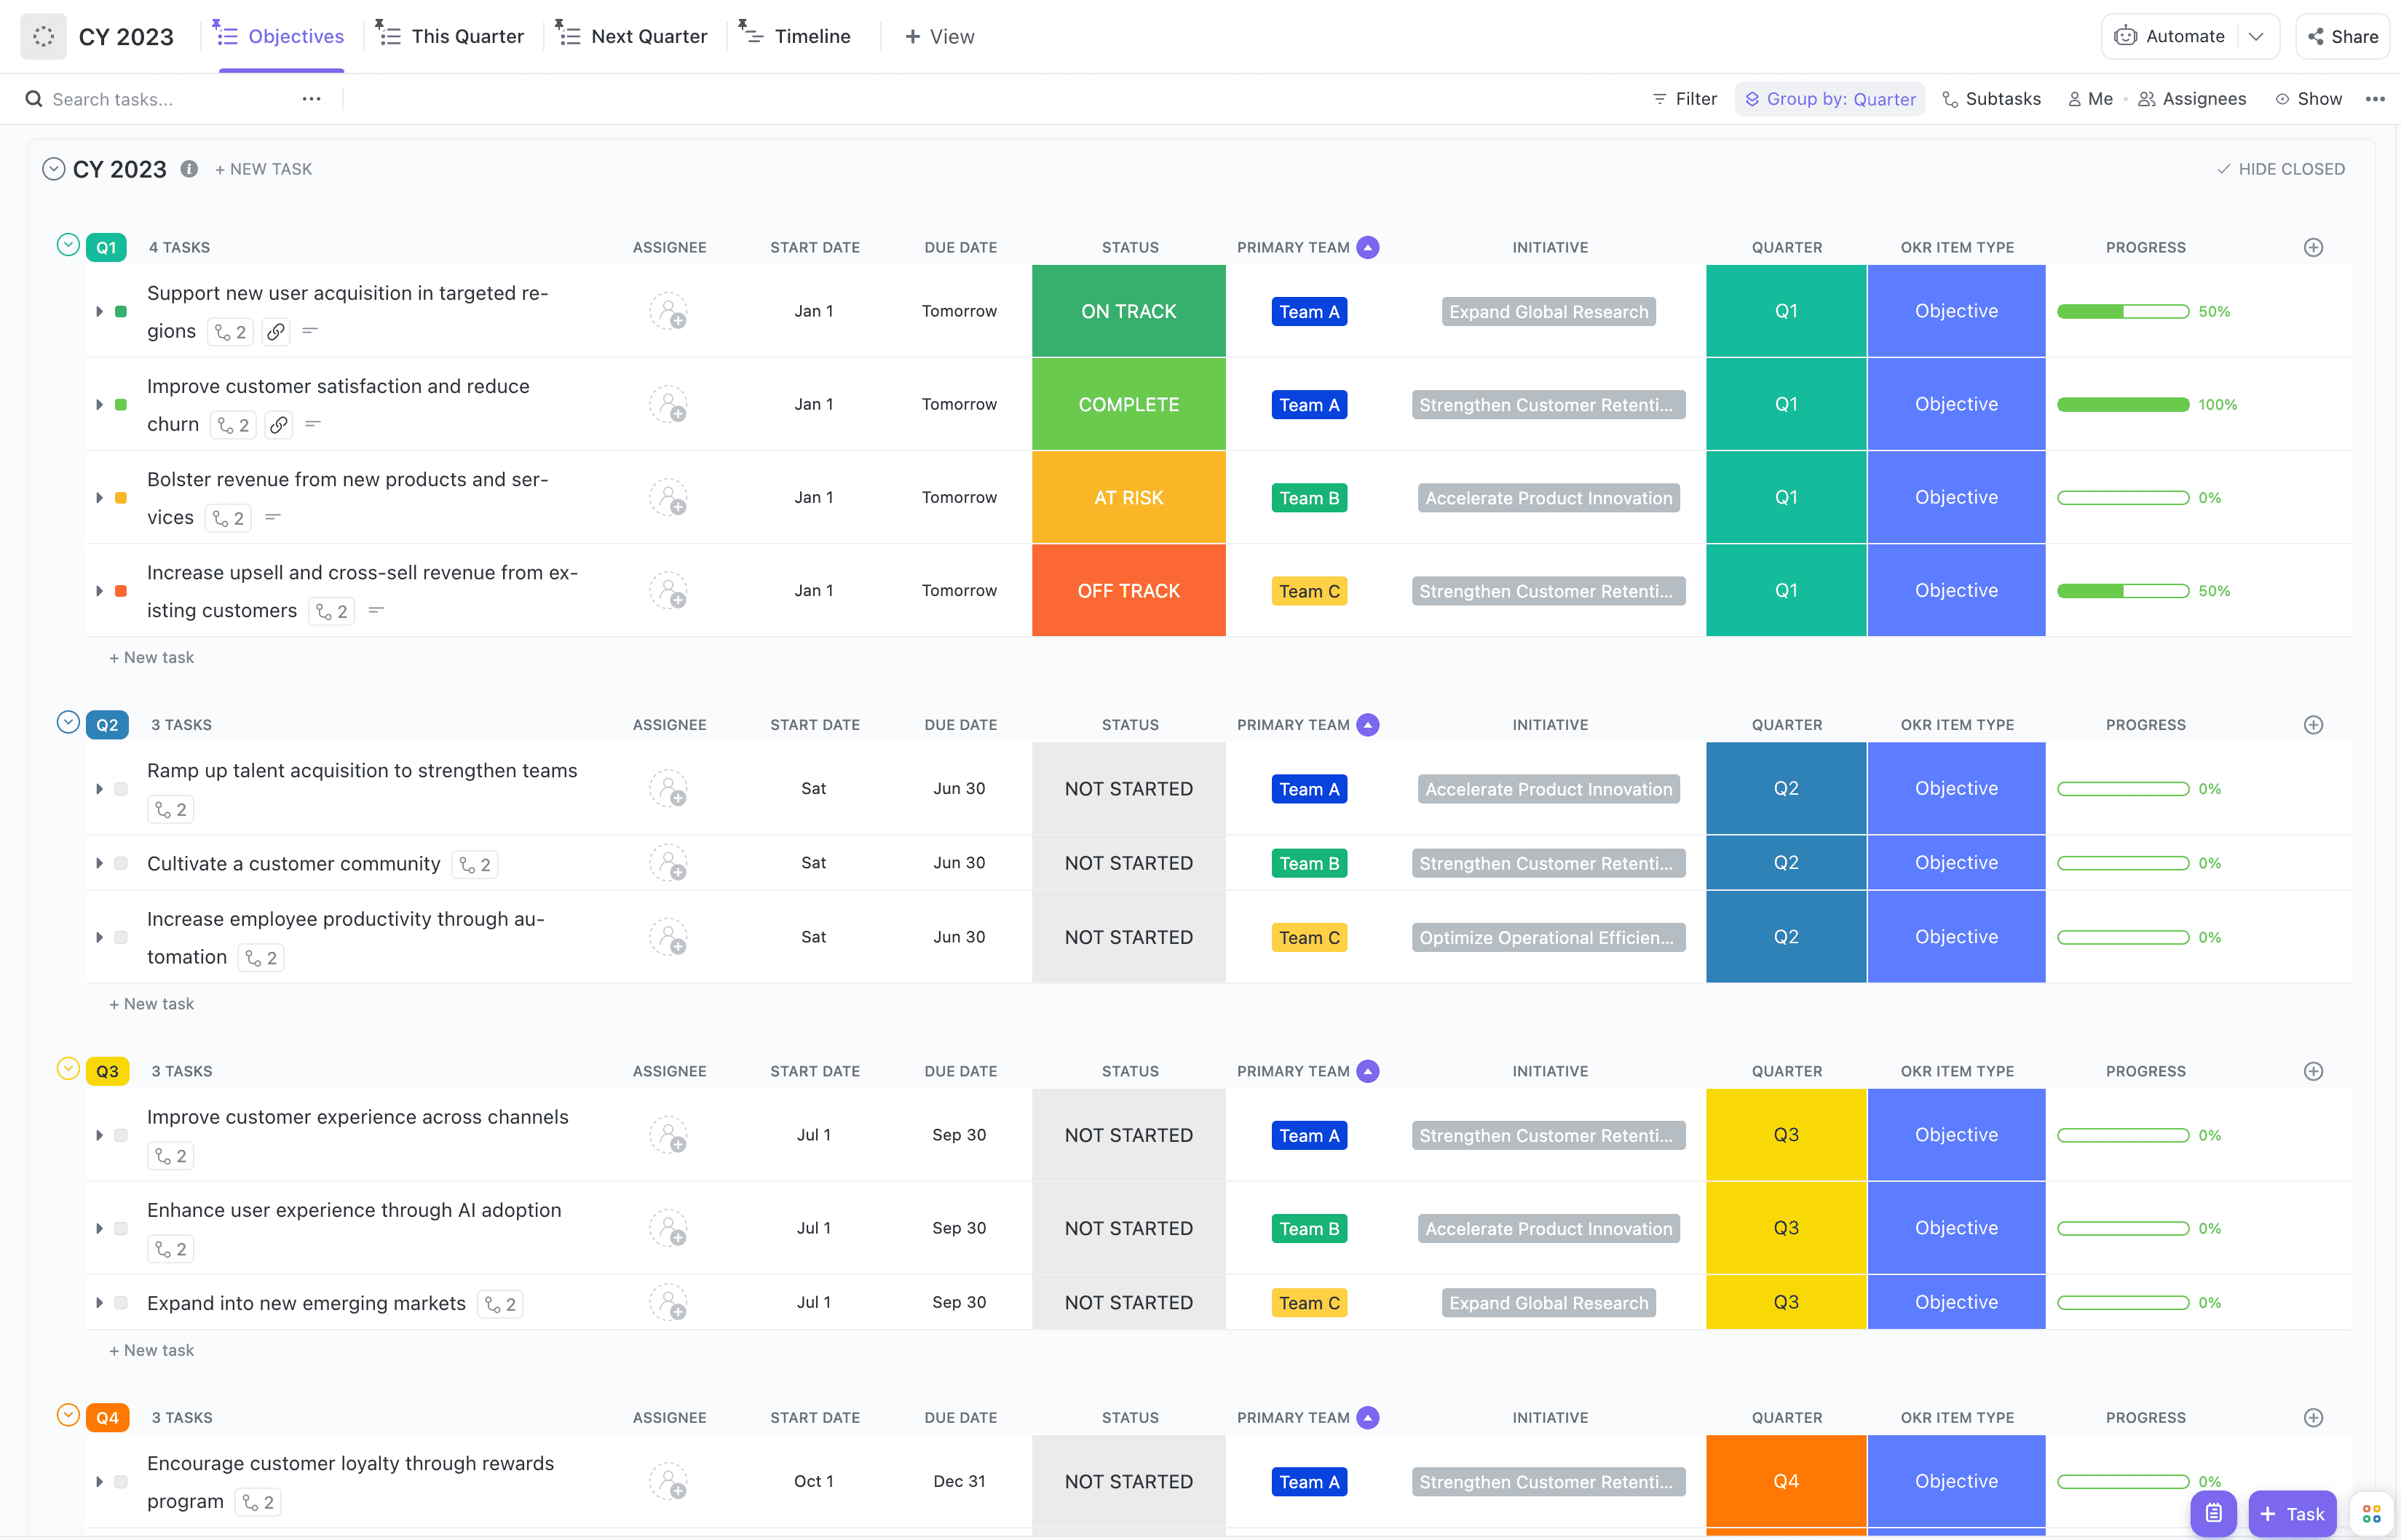 The OKR Folder template is a comprehensive planning tool designed to help individuals and teams set and achieve their goals. A Planning Cadence outlines the basic structure for OKR development, and OKR Lists breakdown goals and monitor progress to help teams stay on track throughout the year.